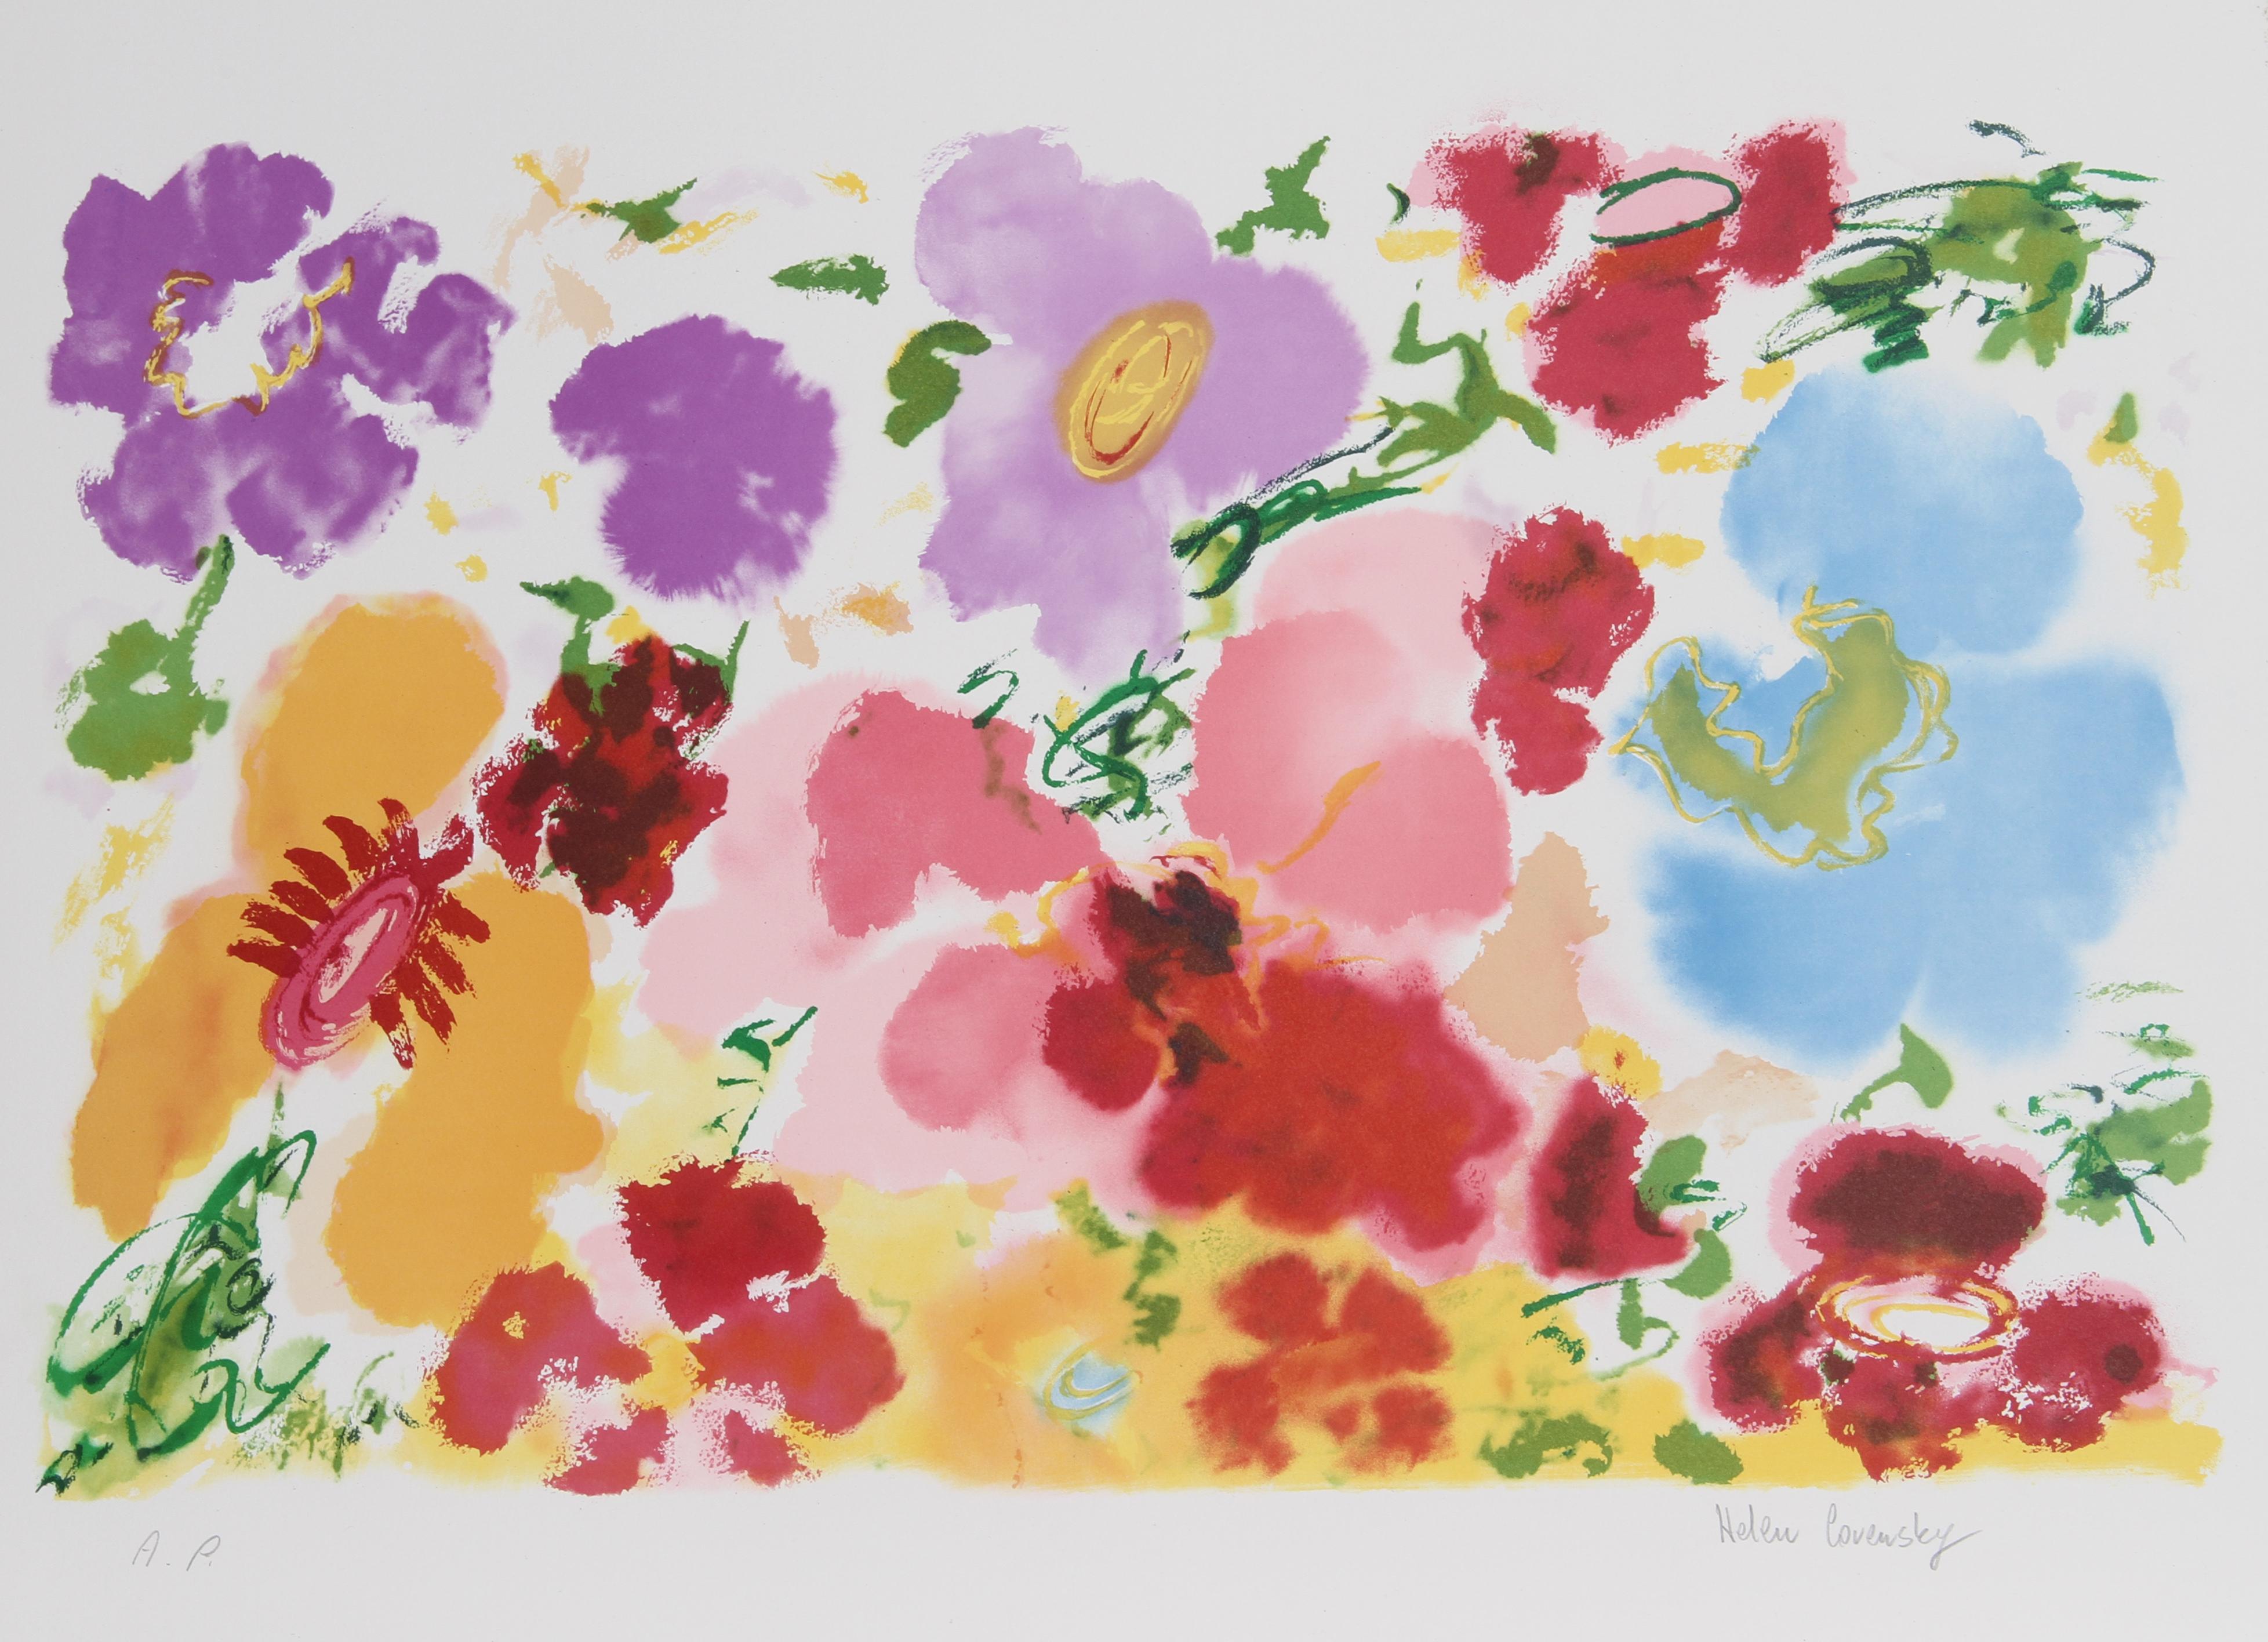 Red Petals
Helen Covensky, Polish/American (1925–2007)
Date: 1980
Lithograph, signed and numbered in pencil
Edition of 225, AP
Image Size: 17.5 x 28 inches
Size: 22 in. x 29 in. (55.88 cm x 73.66 cm)